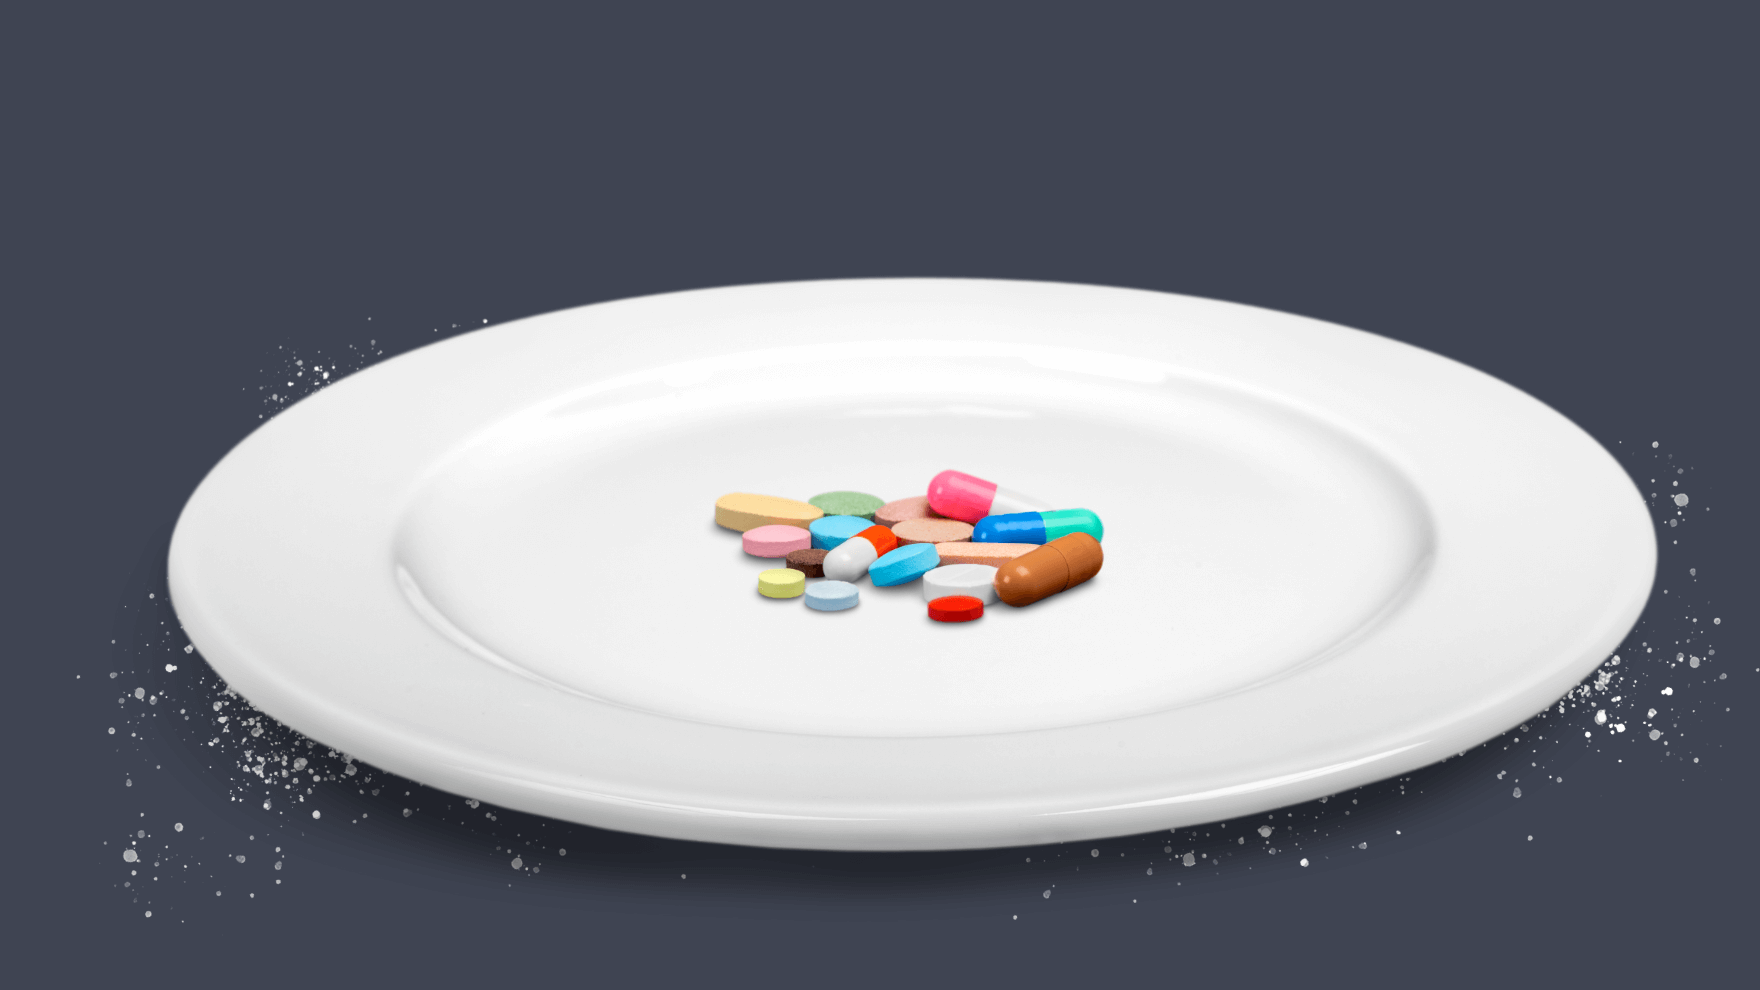 ADHD medication low appetite: Why you're not hungry after taking ADHD meds